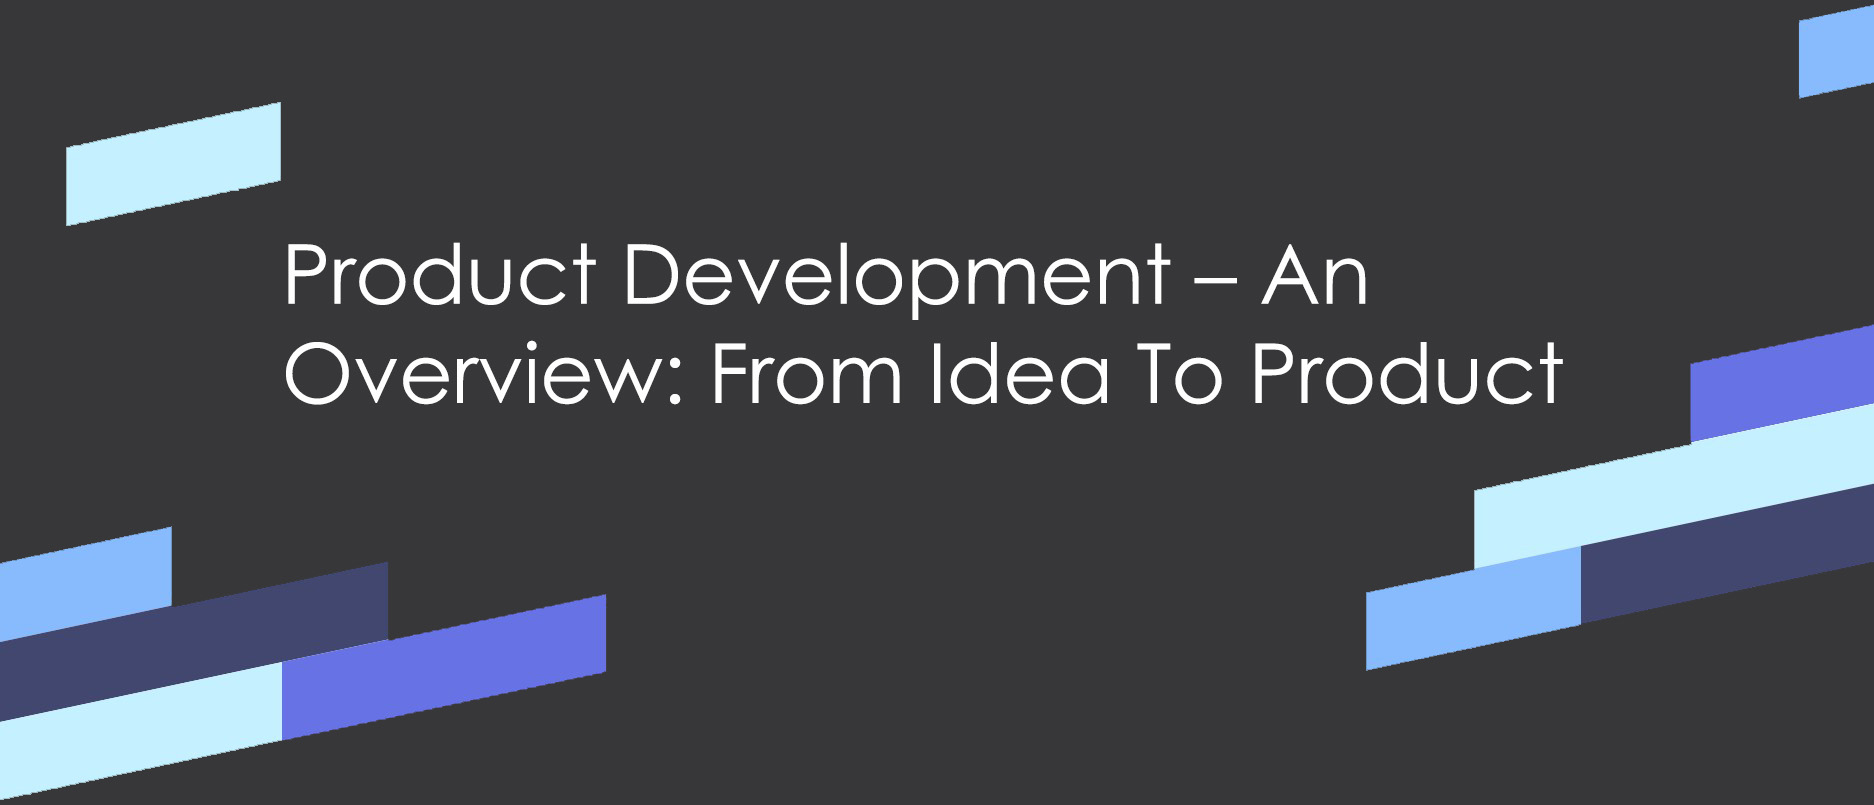 Product Development Overview